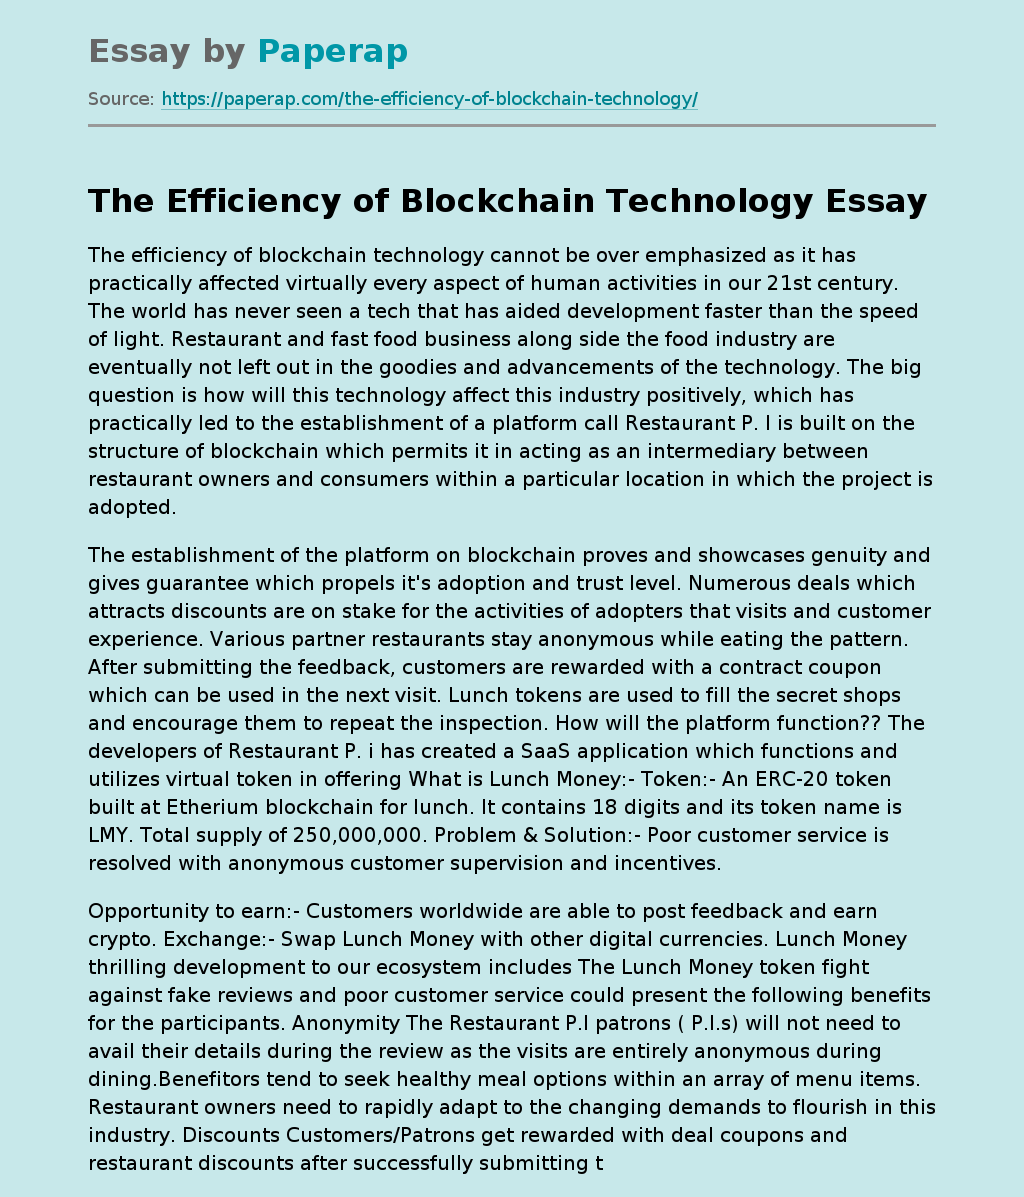 The Efficiency of Blockchain Technology